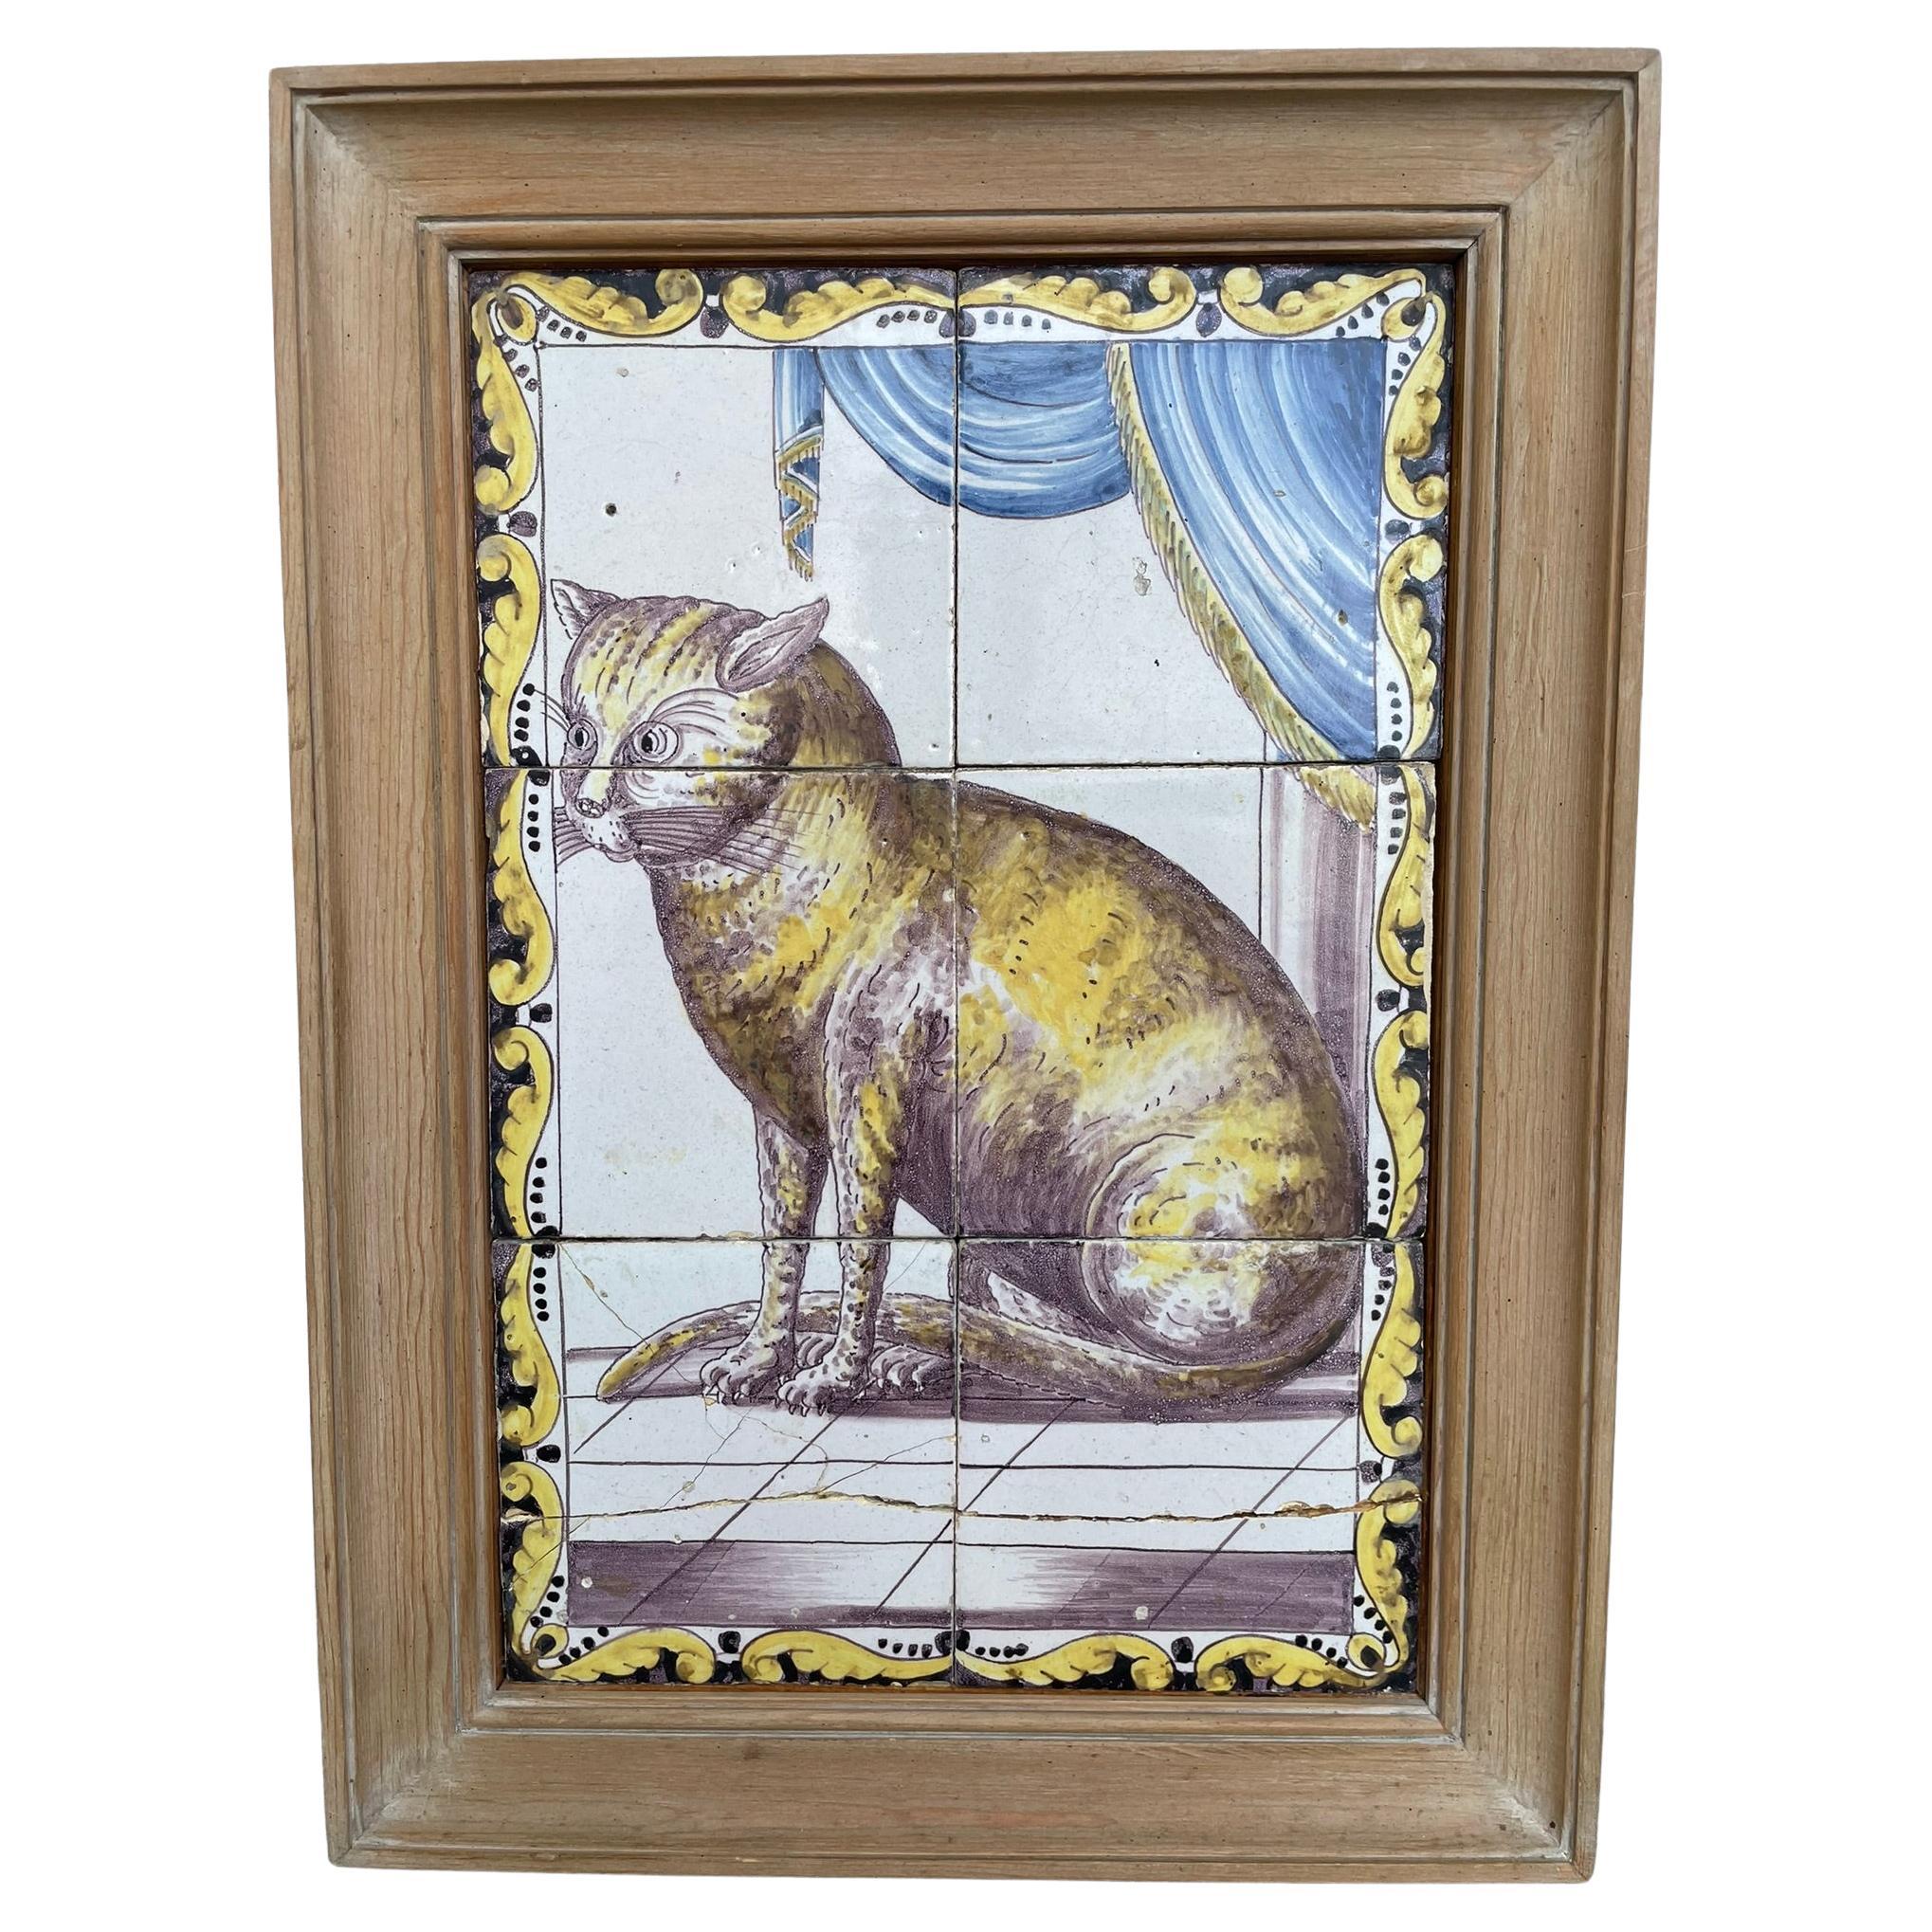 18th Century, Dutch Delft Framed Tile Painting of a Cat